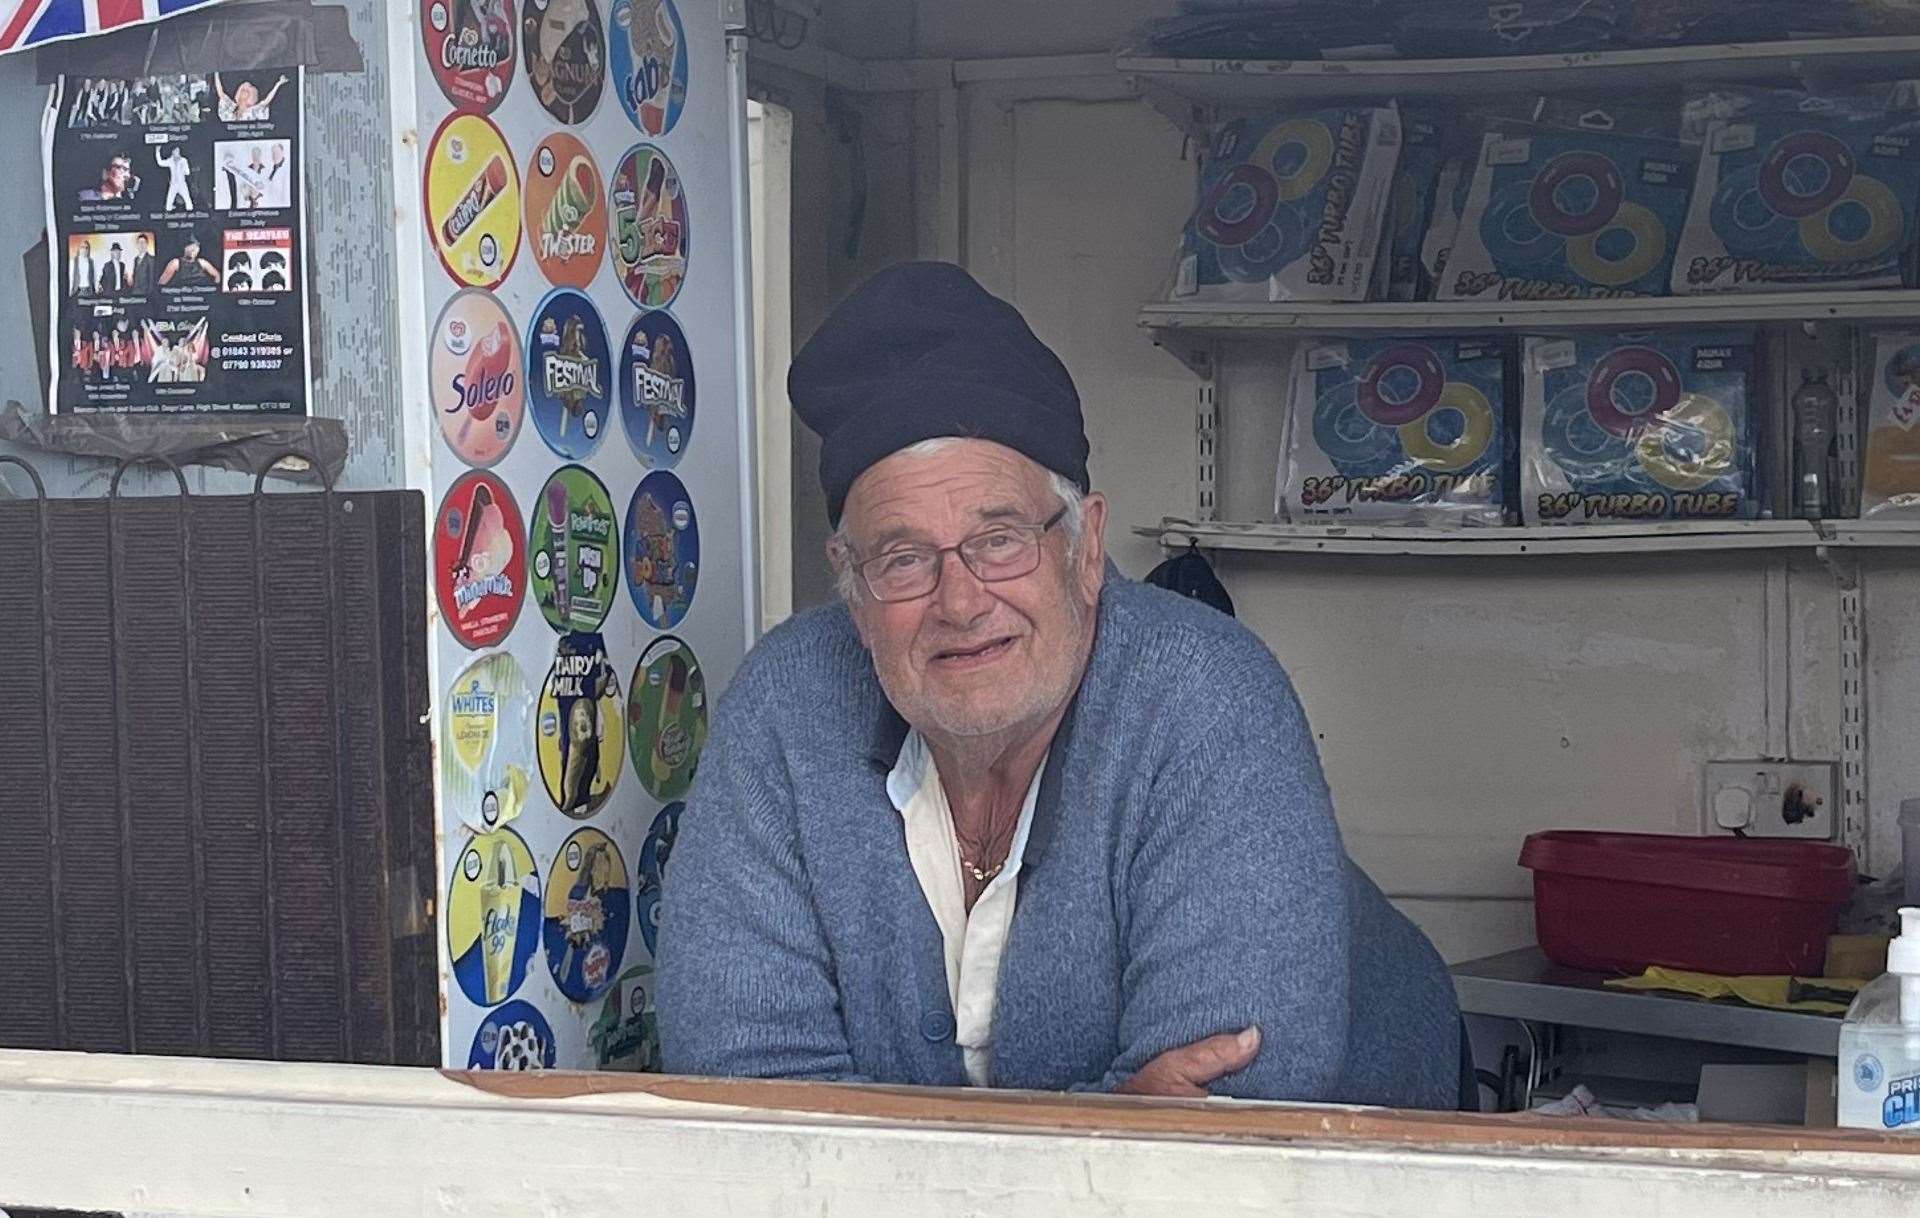 Tony Hobbs from the West Bay Kiosk lost trade due to the beach closure over the May bank holiday weekend